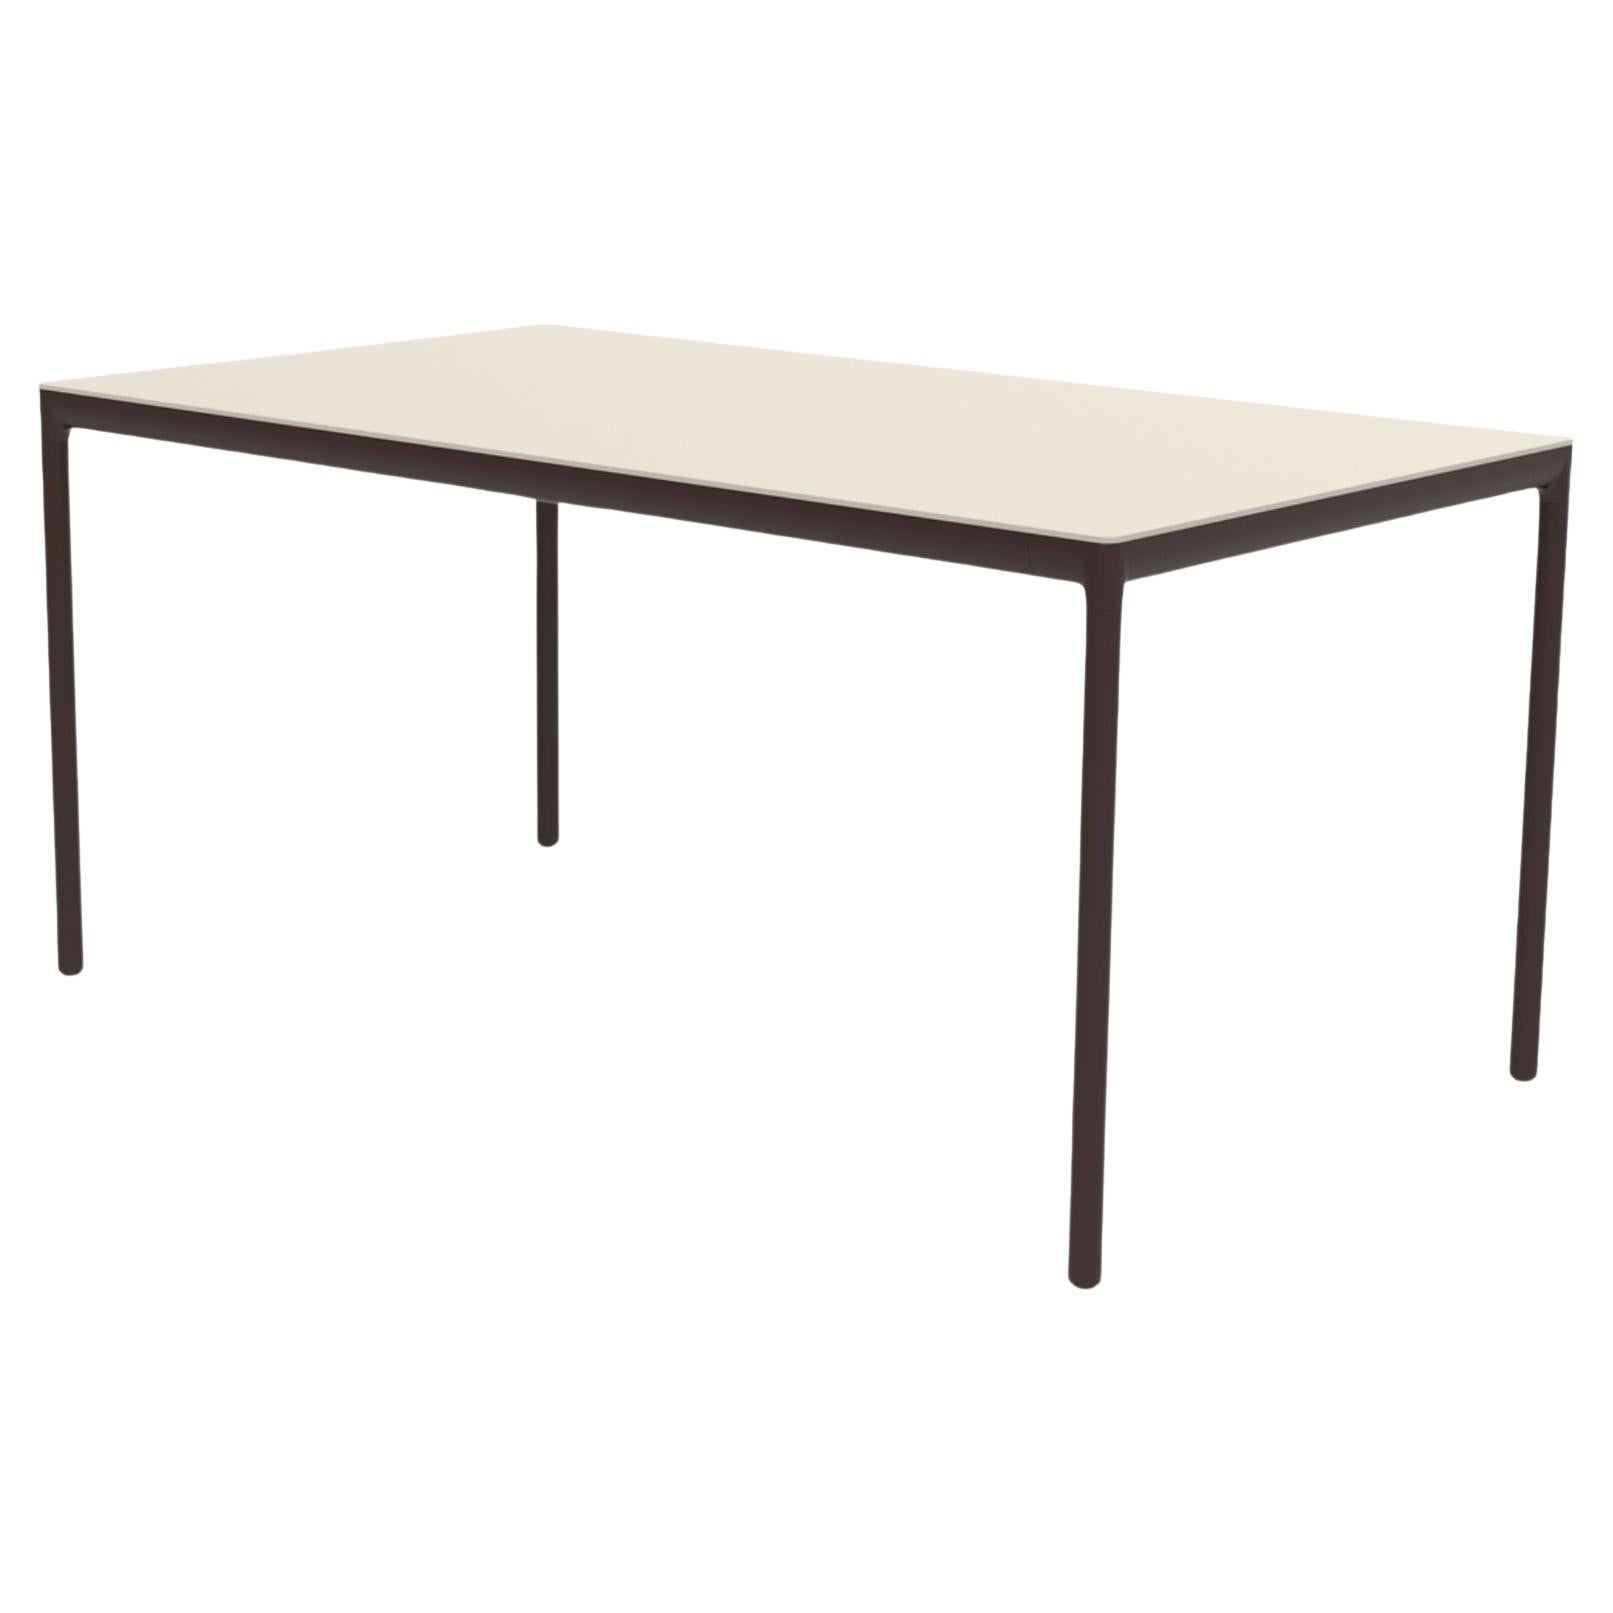 Ribbons Chocolate 160 Coffee Table by Mowee For Sale